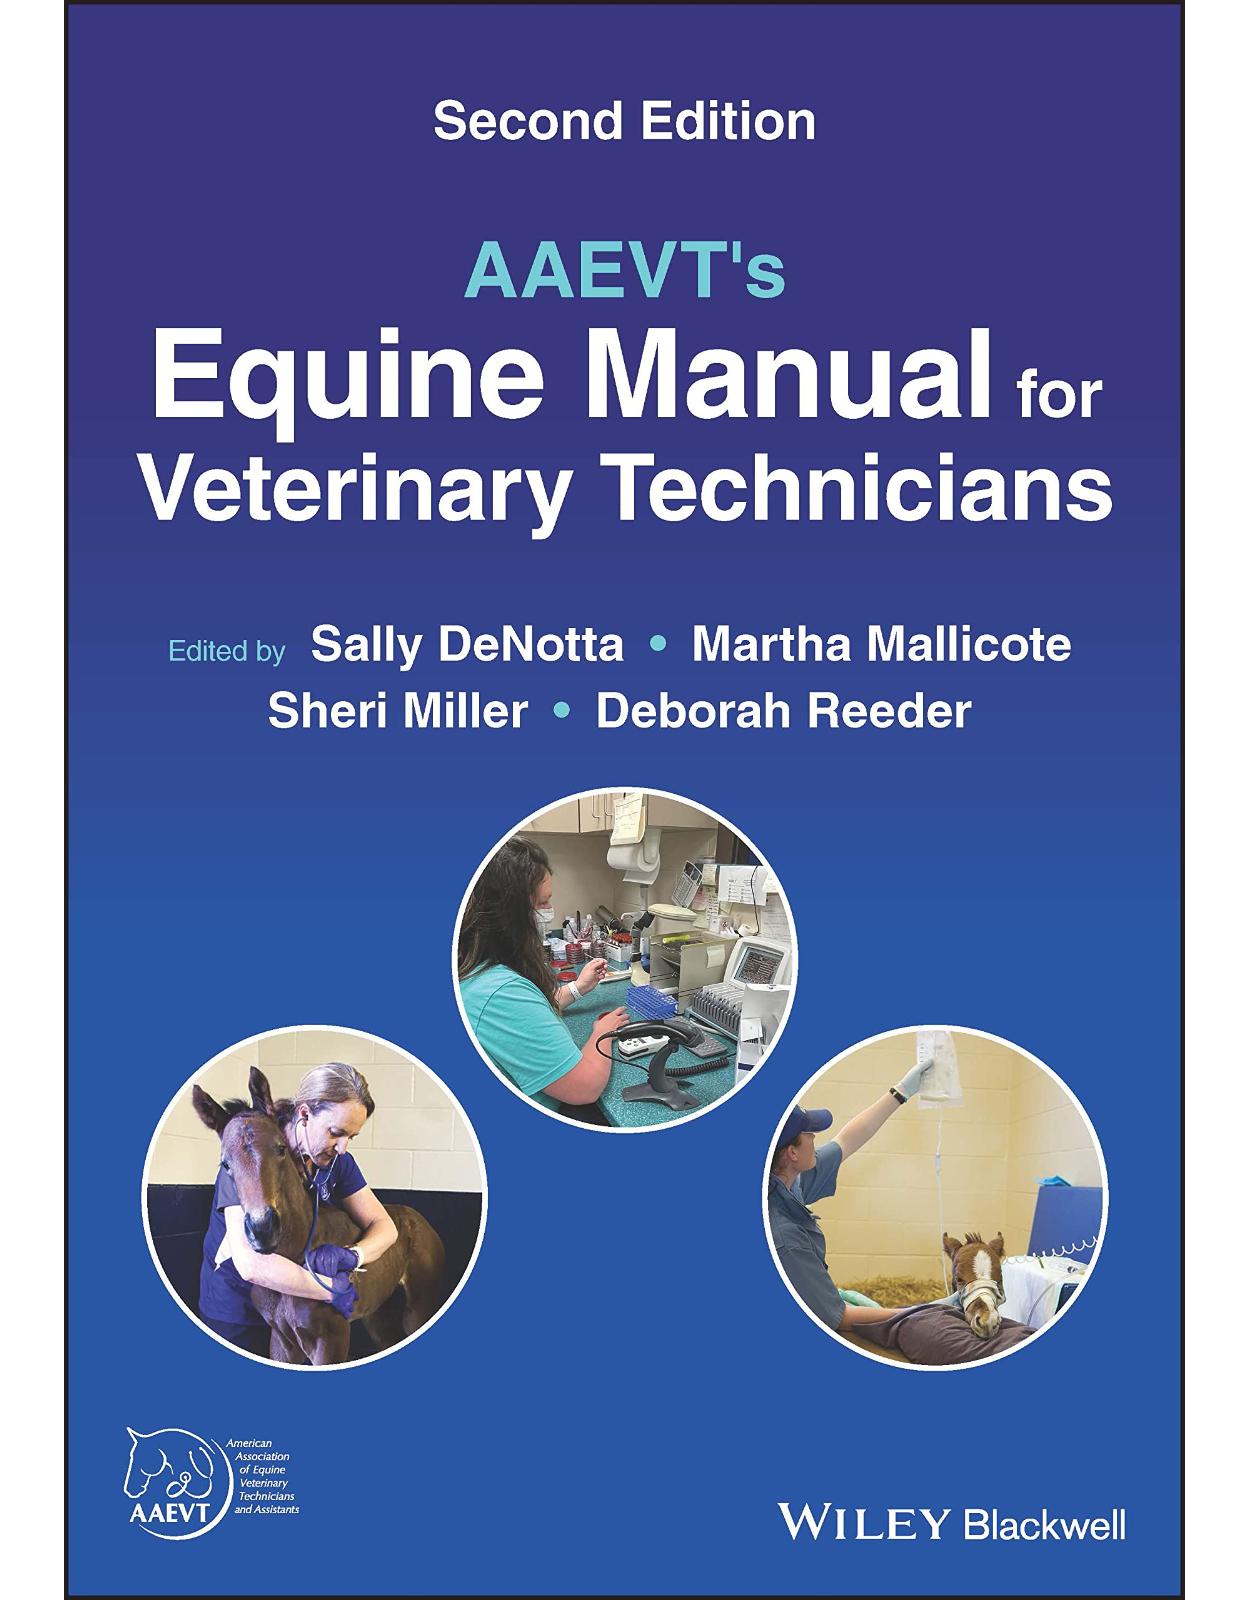 AAEVT’s Equine Manual for Veterinary Technicians